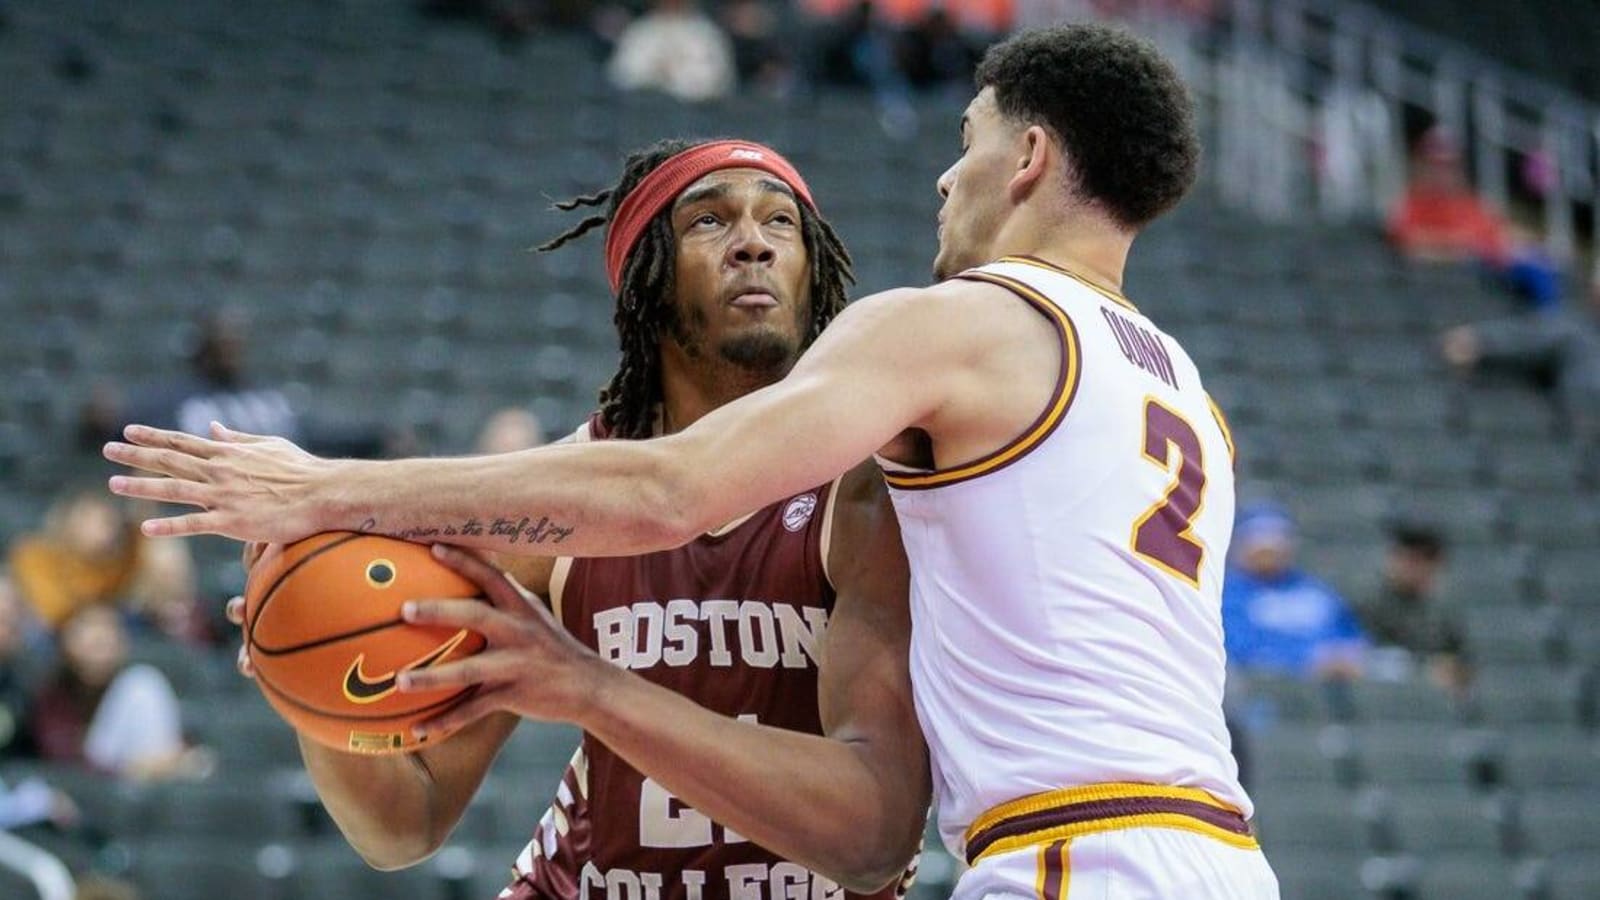 Loyola Chicago rallies late to top Boston College